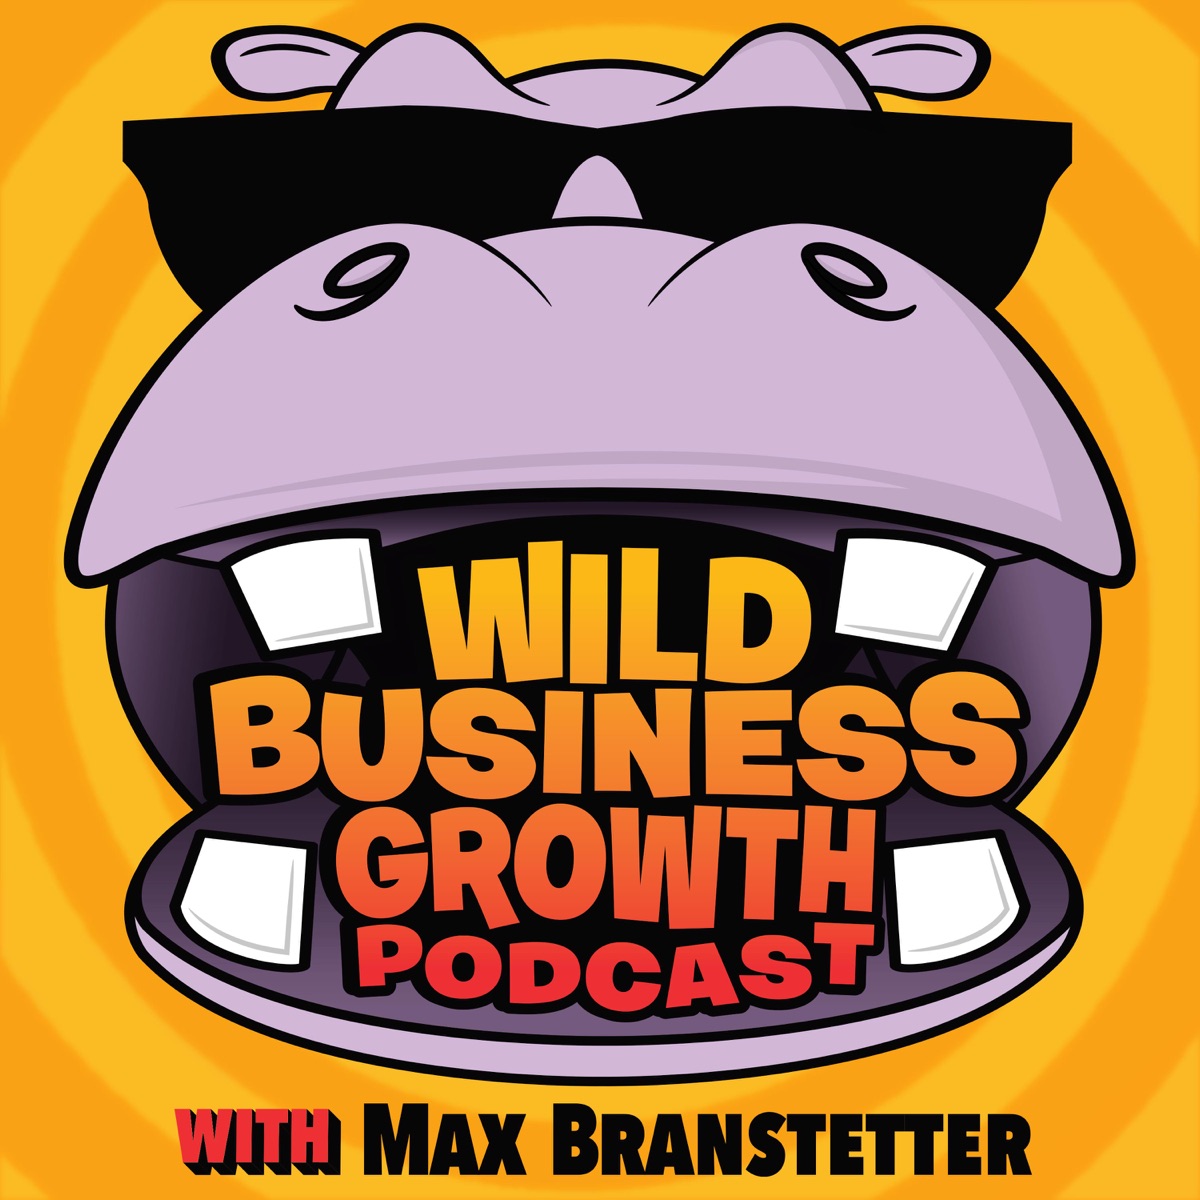 image of a hippopotamus with the name of the podcast "Wild Business growth podcast" in its mouth.